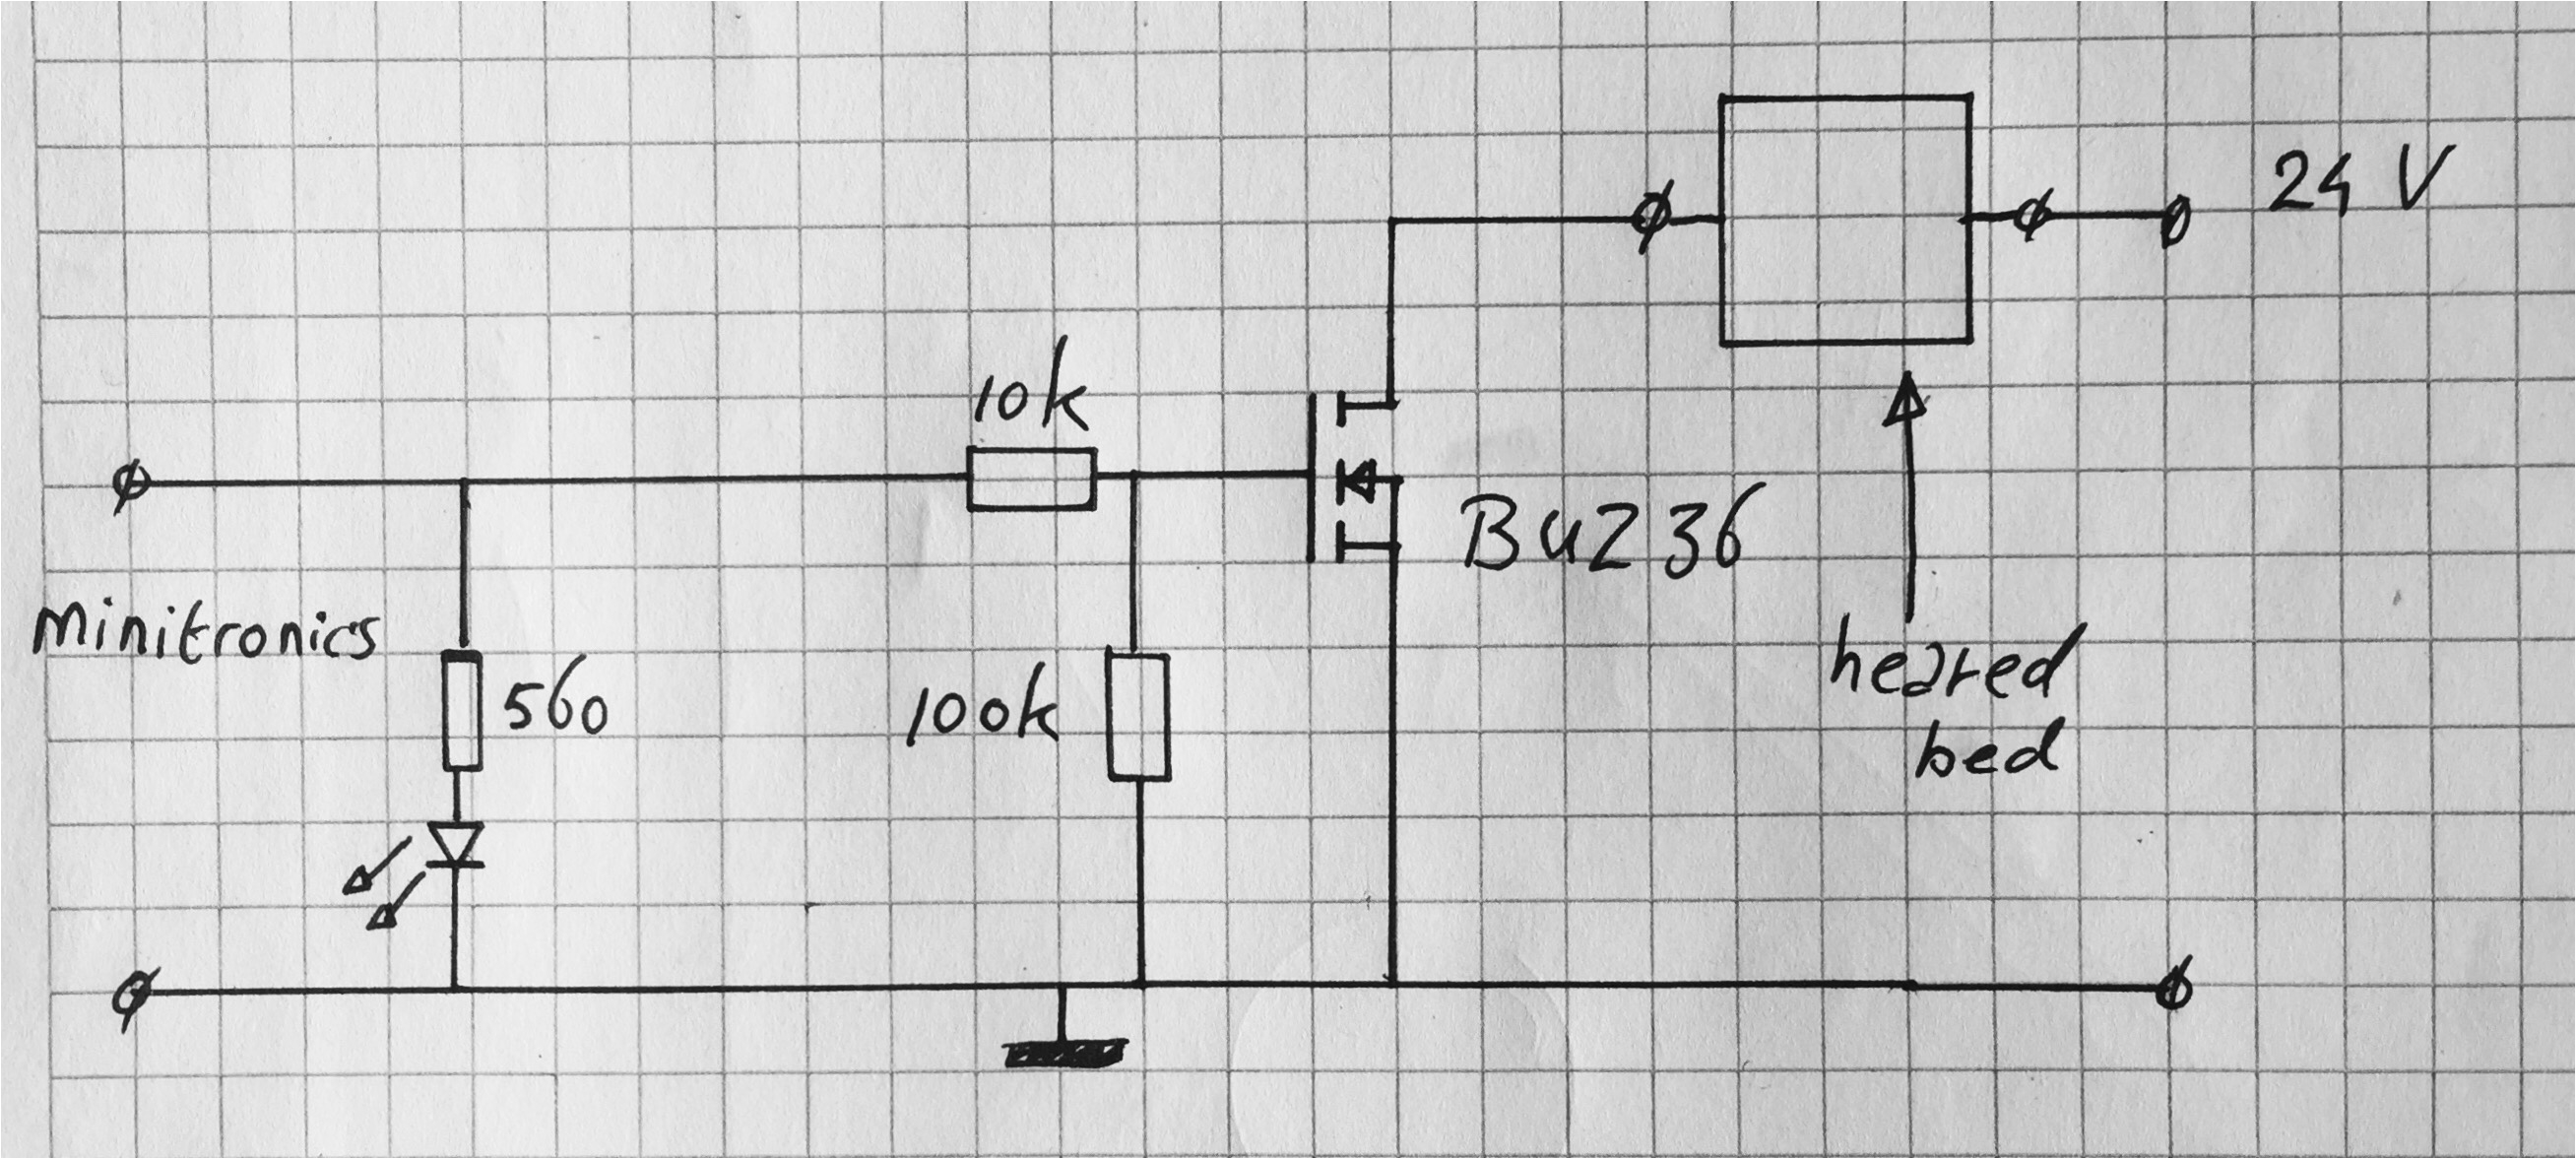 heated bed mosfet switch circuit diagram